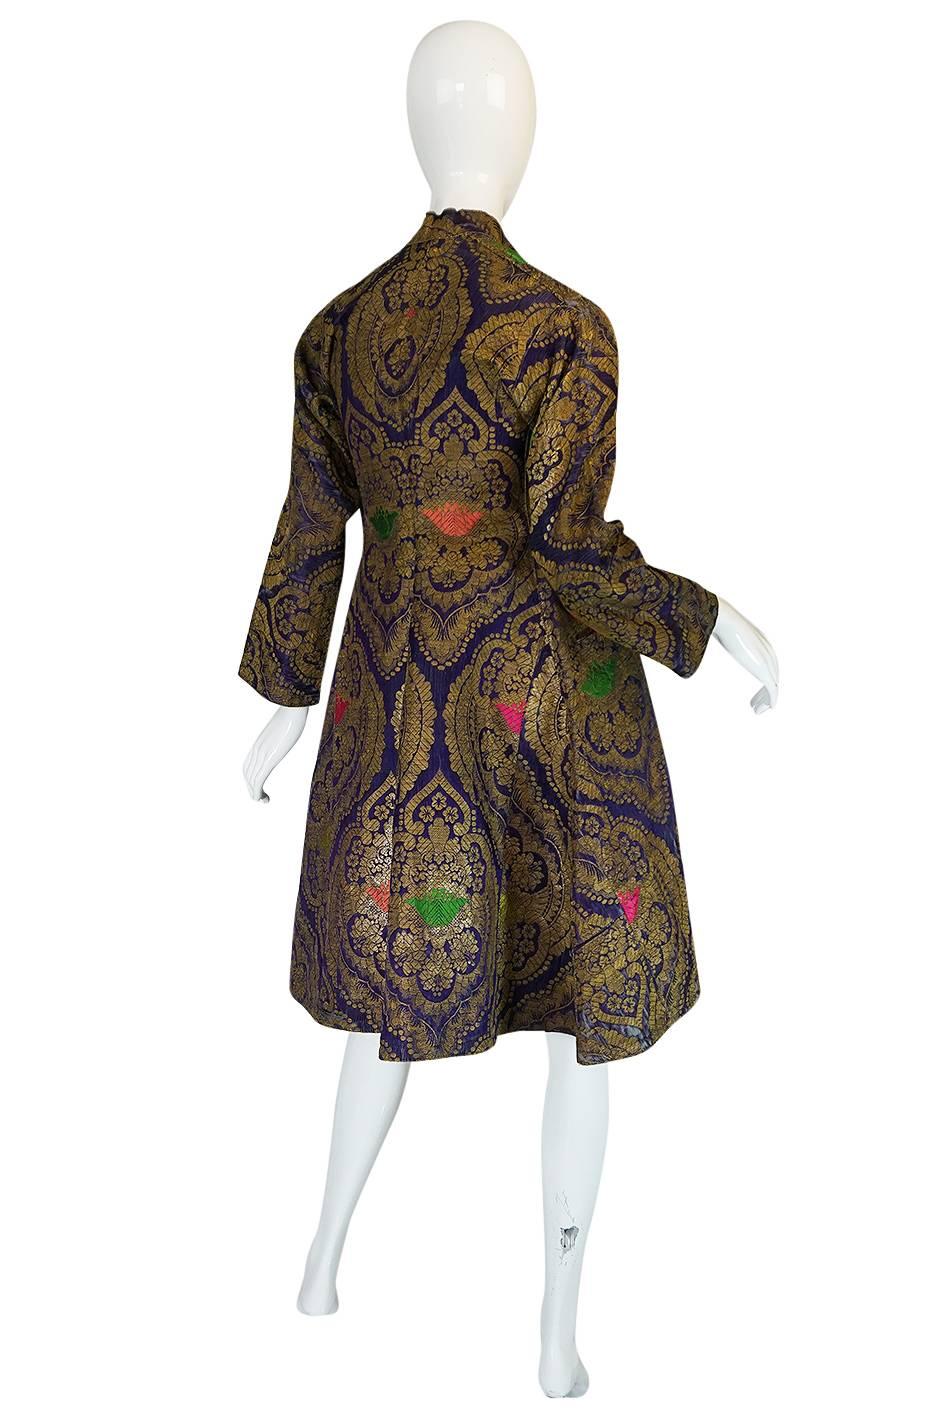 

This is one of the most beautiful antique coats I have ever had in the shop. It is made from a beautiful Russian metallic brocade with a bright contrasting cotton lining. Both fabrics inside and out are extraordinary. The exterior fabric is a real